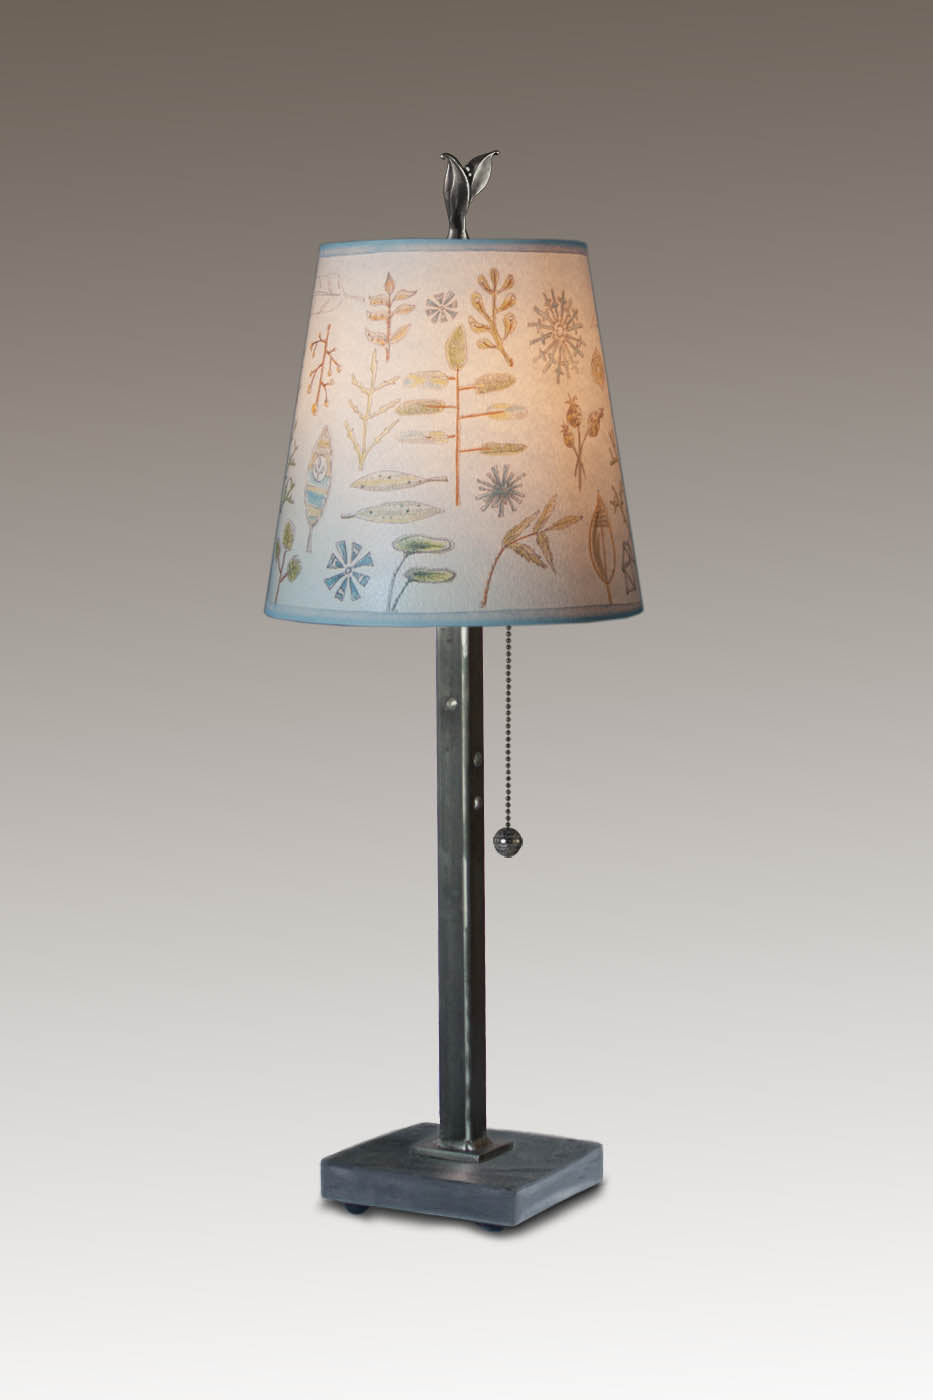 Janna Ugone & Co Table Lamp Steel Table Lamp with Small Drum Shade in Field Chart